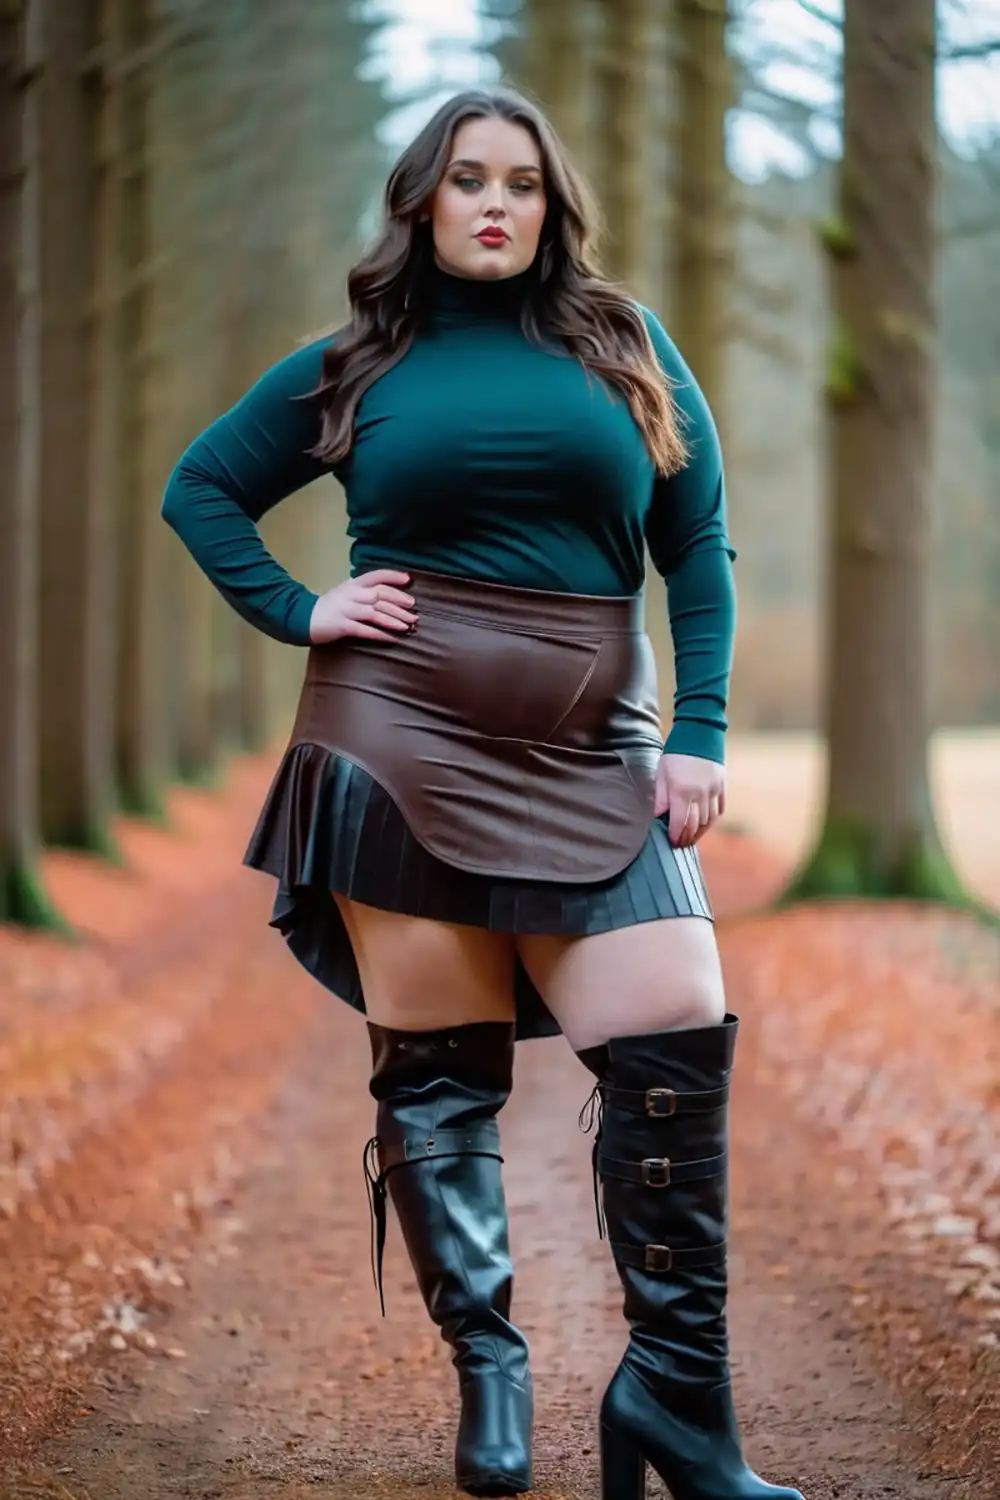 Beautiful curvy Girl wearing skirt with thigh-high boots